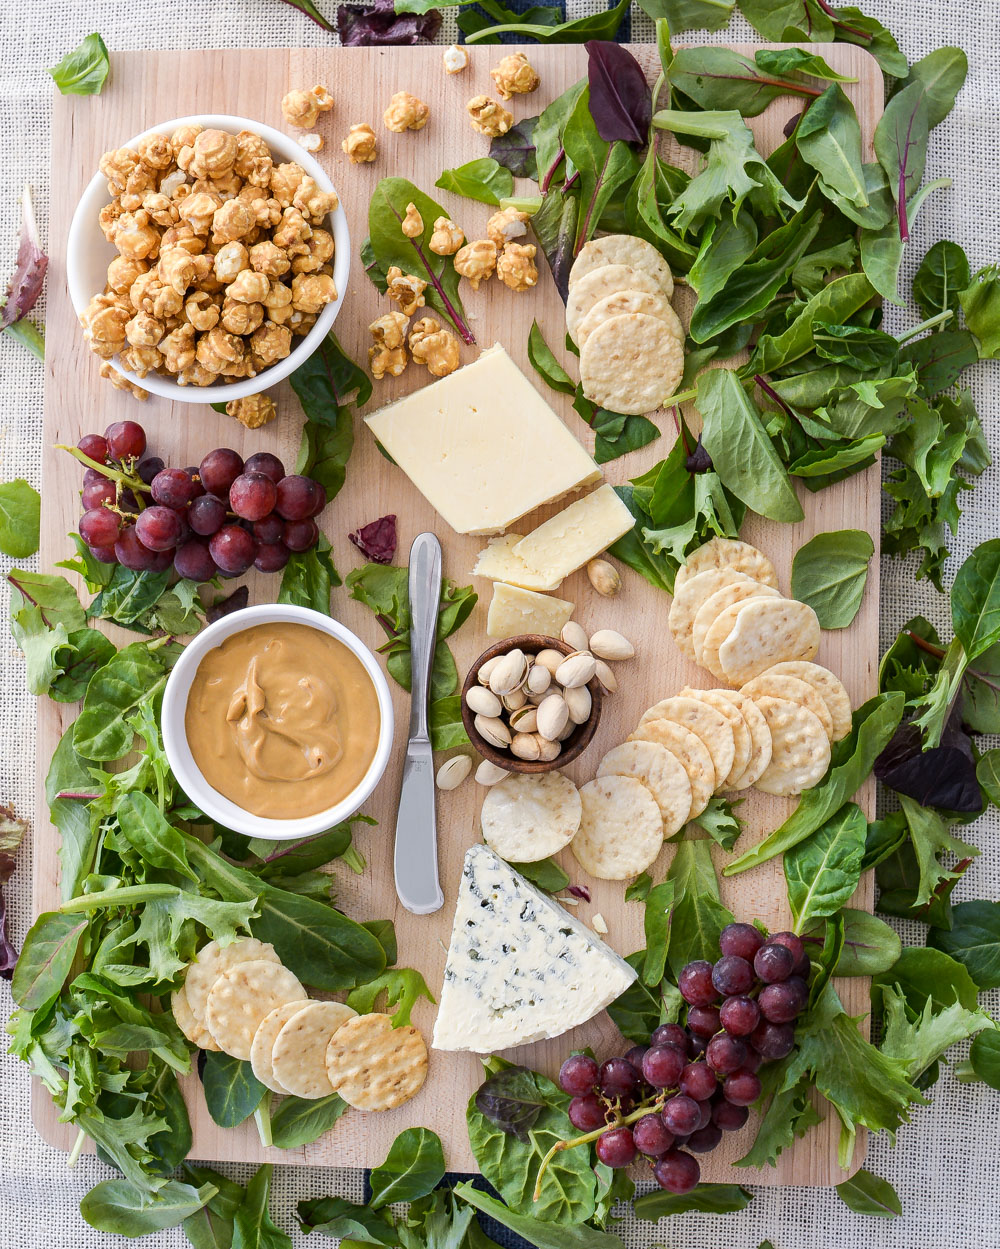 Invite your friends over, pour a glass of wine and enjoy this Caramel Corn + an Oscar Night Cheese Board!